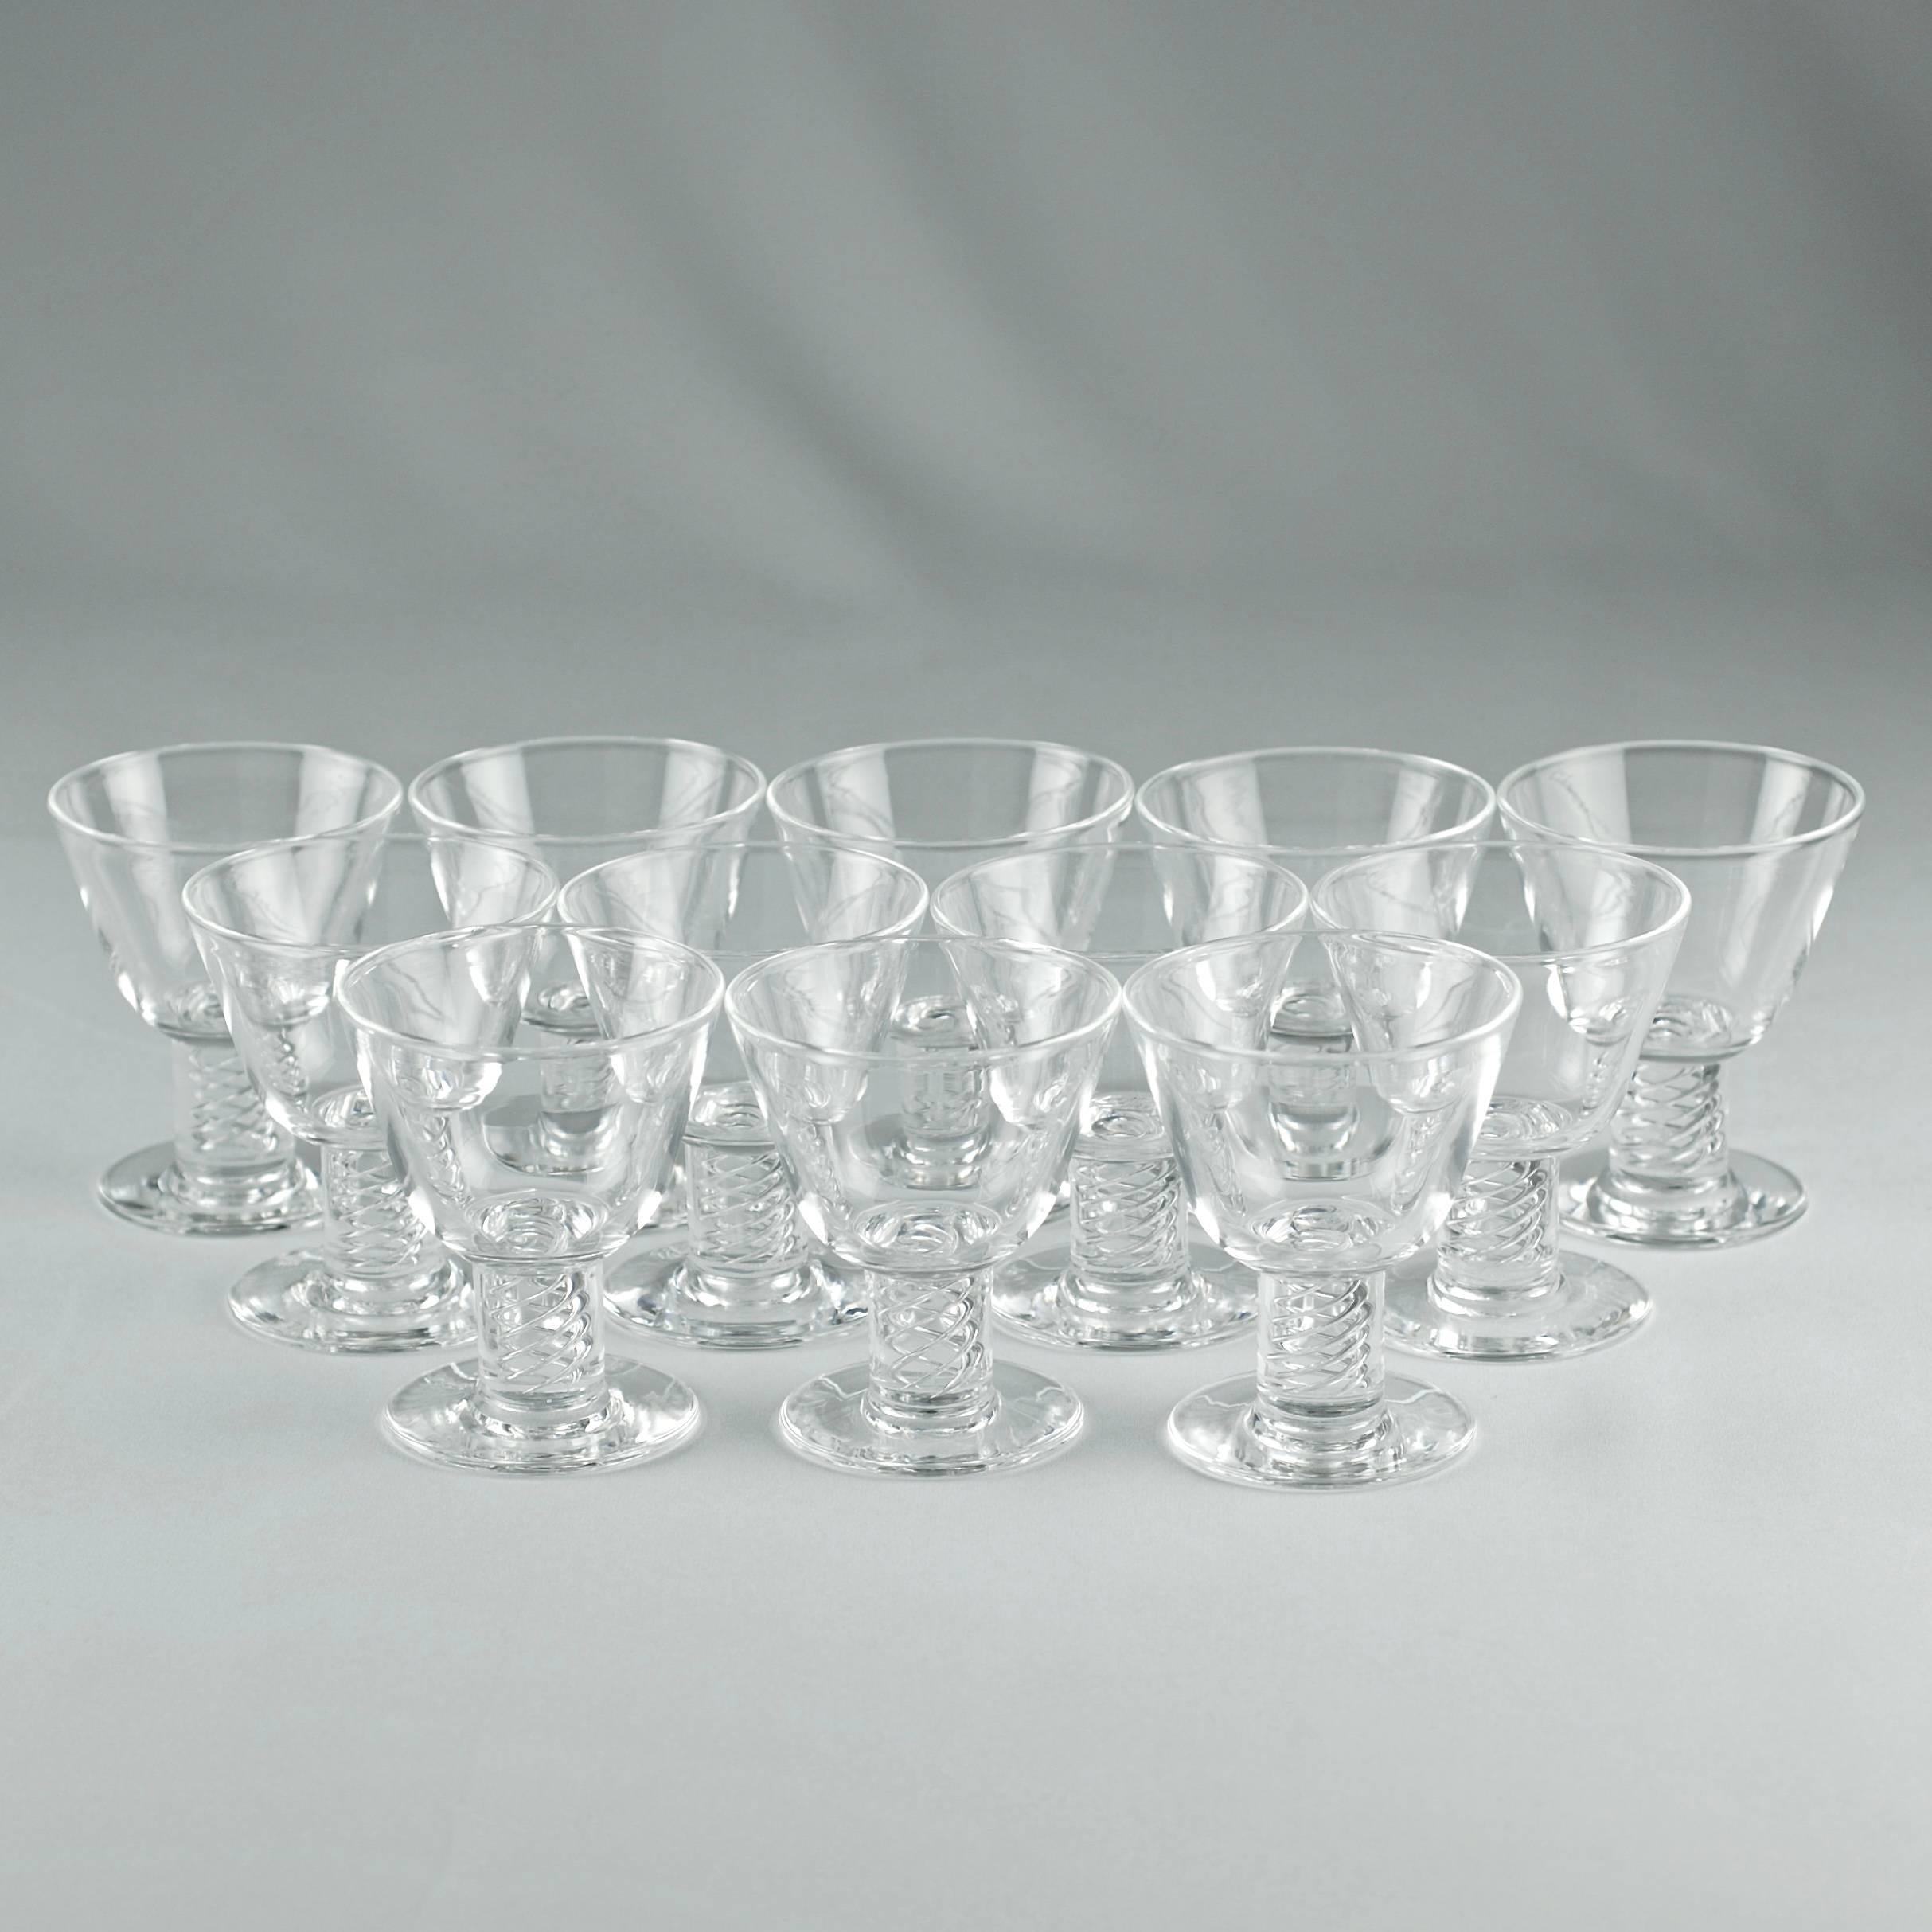 George Thompson for Steuben Air Twist Cocktail Glasses, Set of 12 in Shape 7917 1